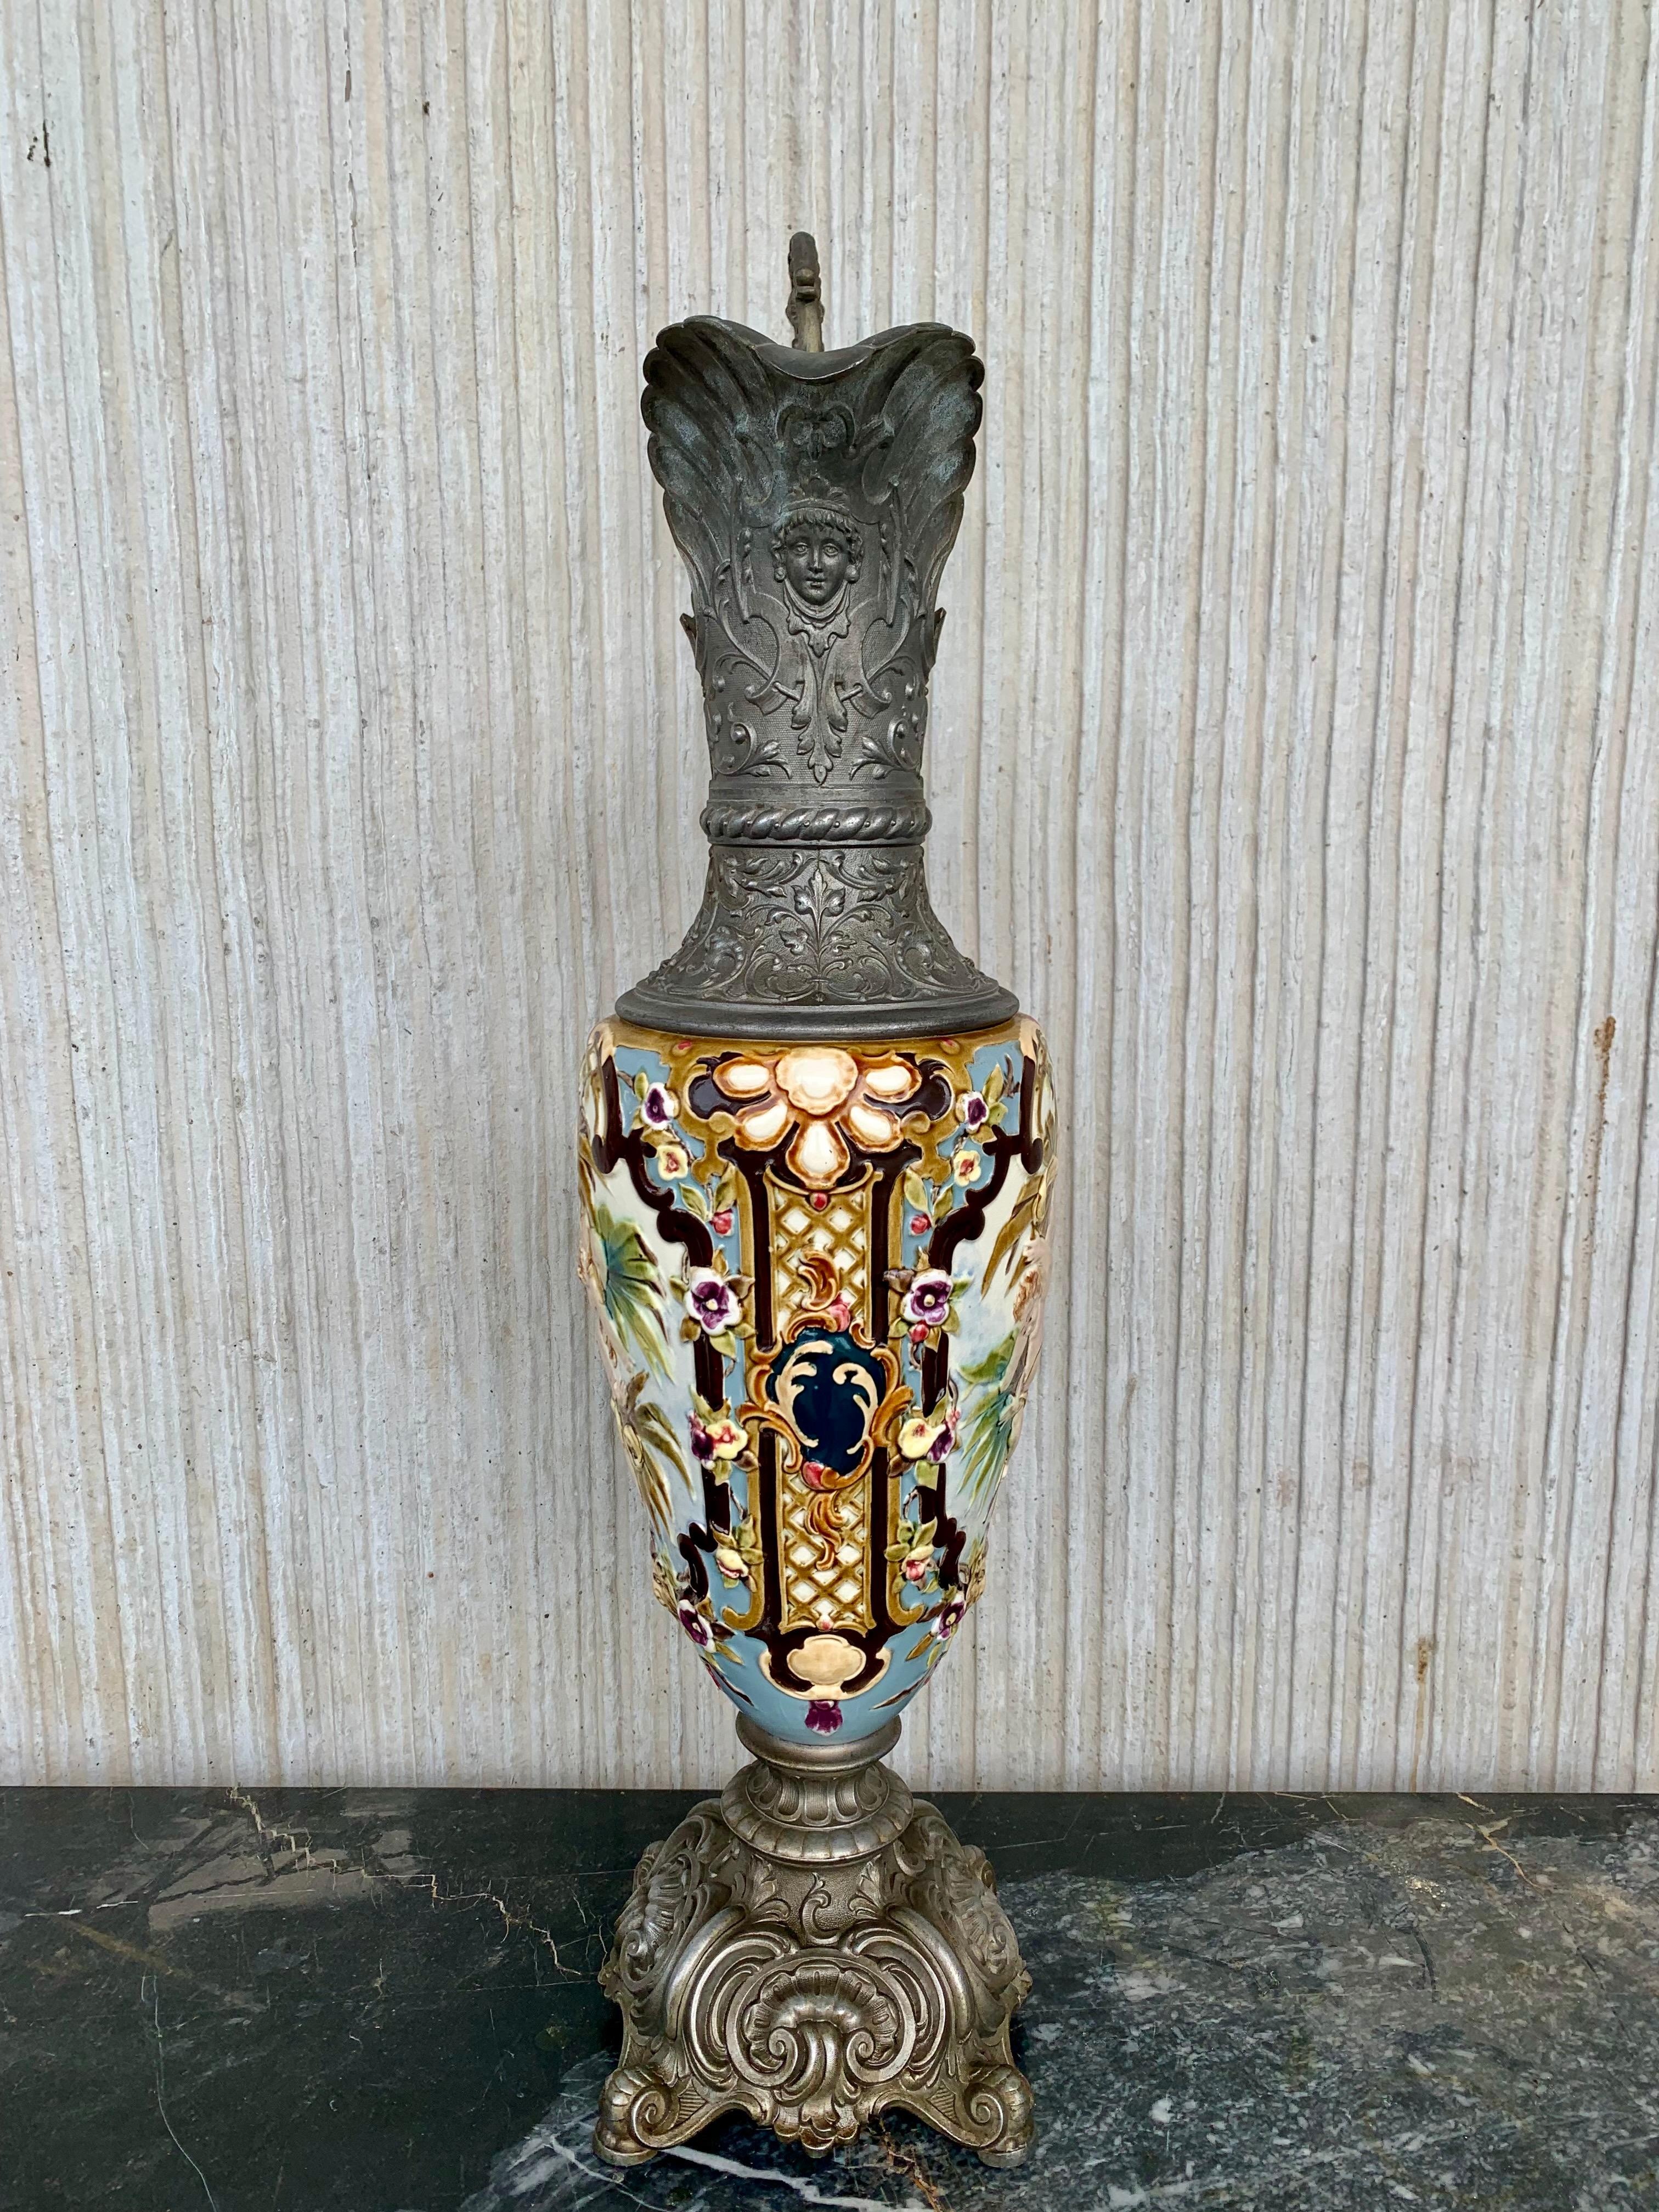 19th Century French Hand Painted Faience Ewer Vase In Good Condition For Sale In Miami, FL